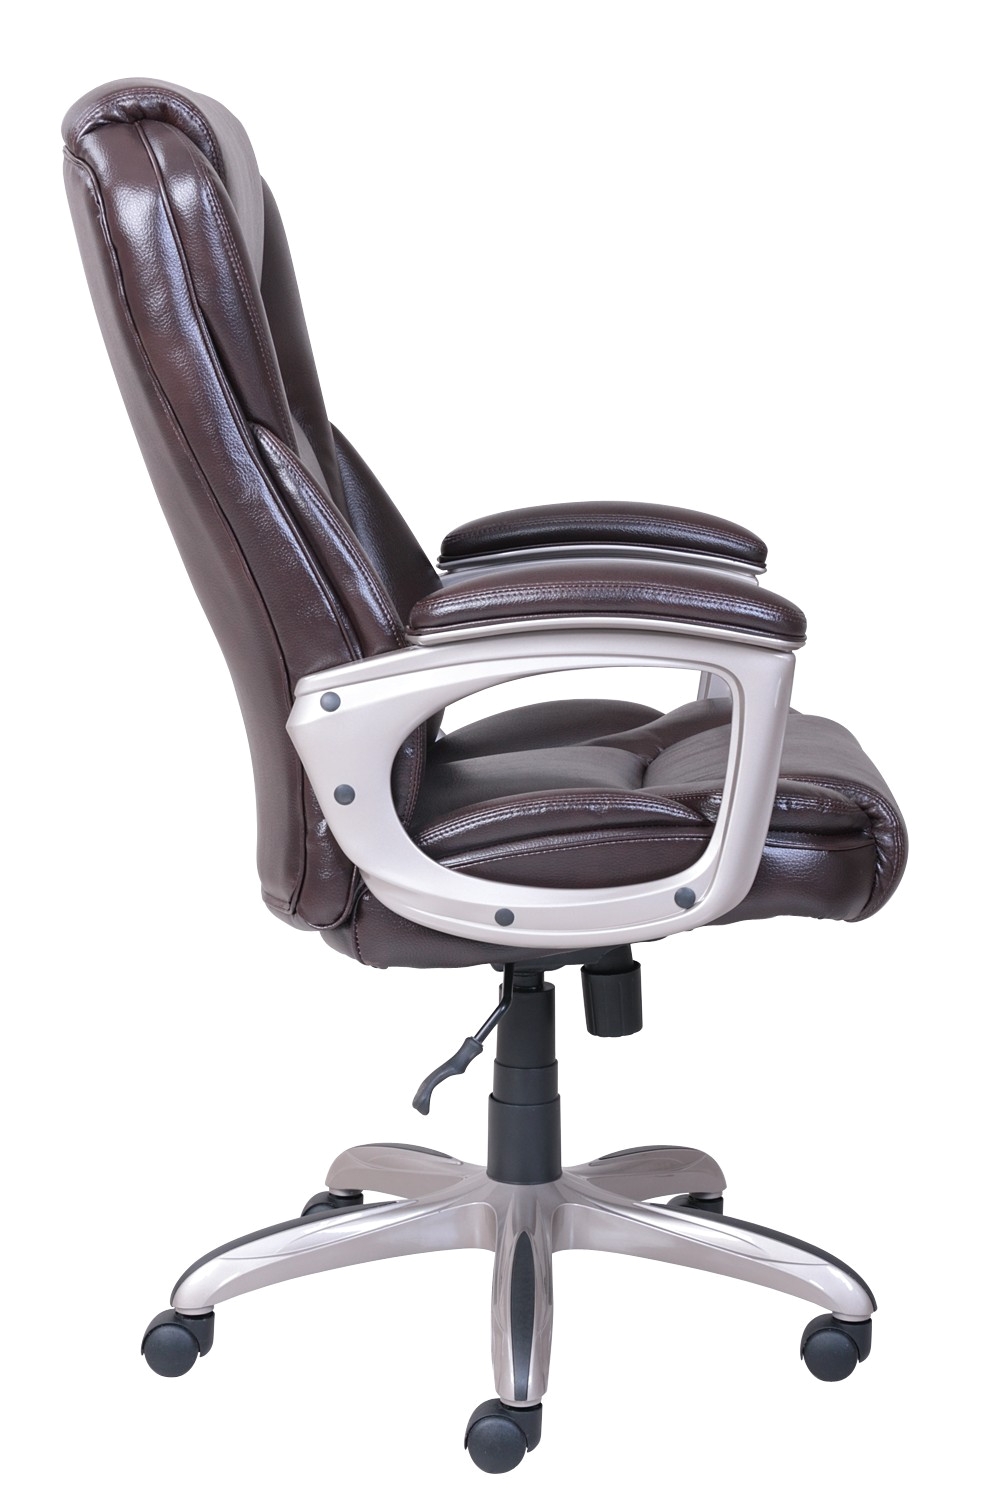 Workpro Commercial Mesh Back Executive Chair Black Lovely Workpro Commercial Mesh Back Executive Chair Black 20